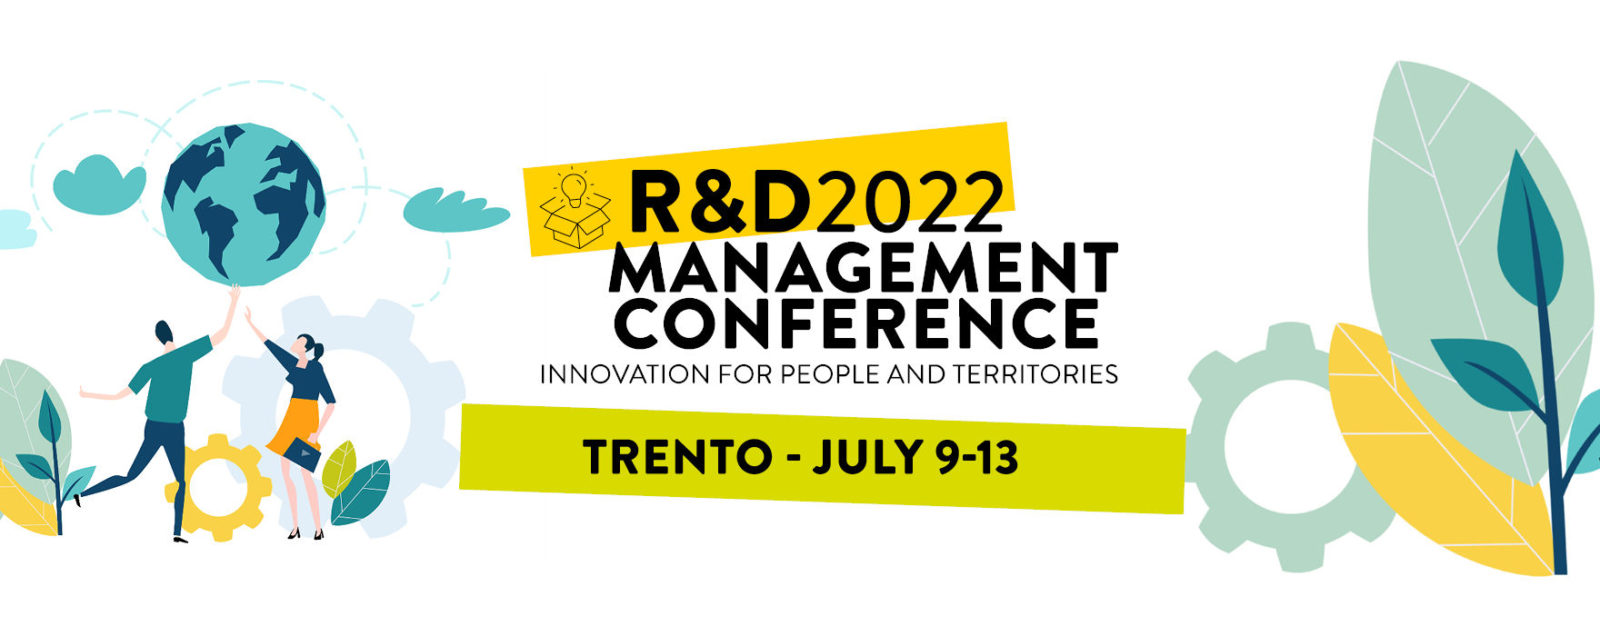 Meet the editors at R&D Management Conference 2022 R&D Today